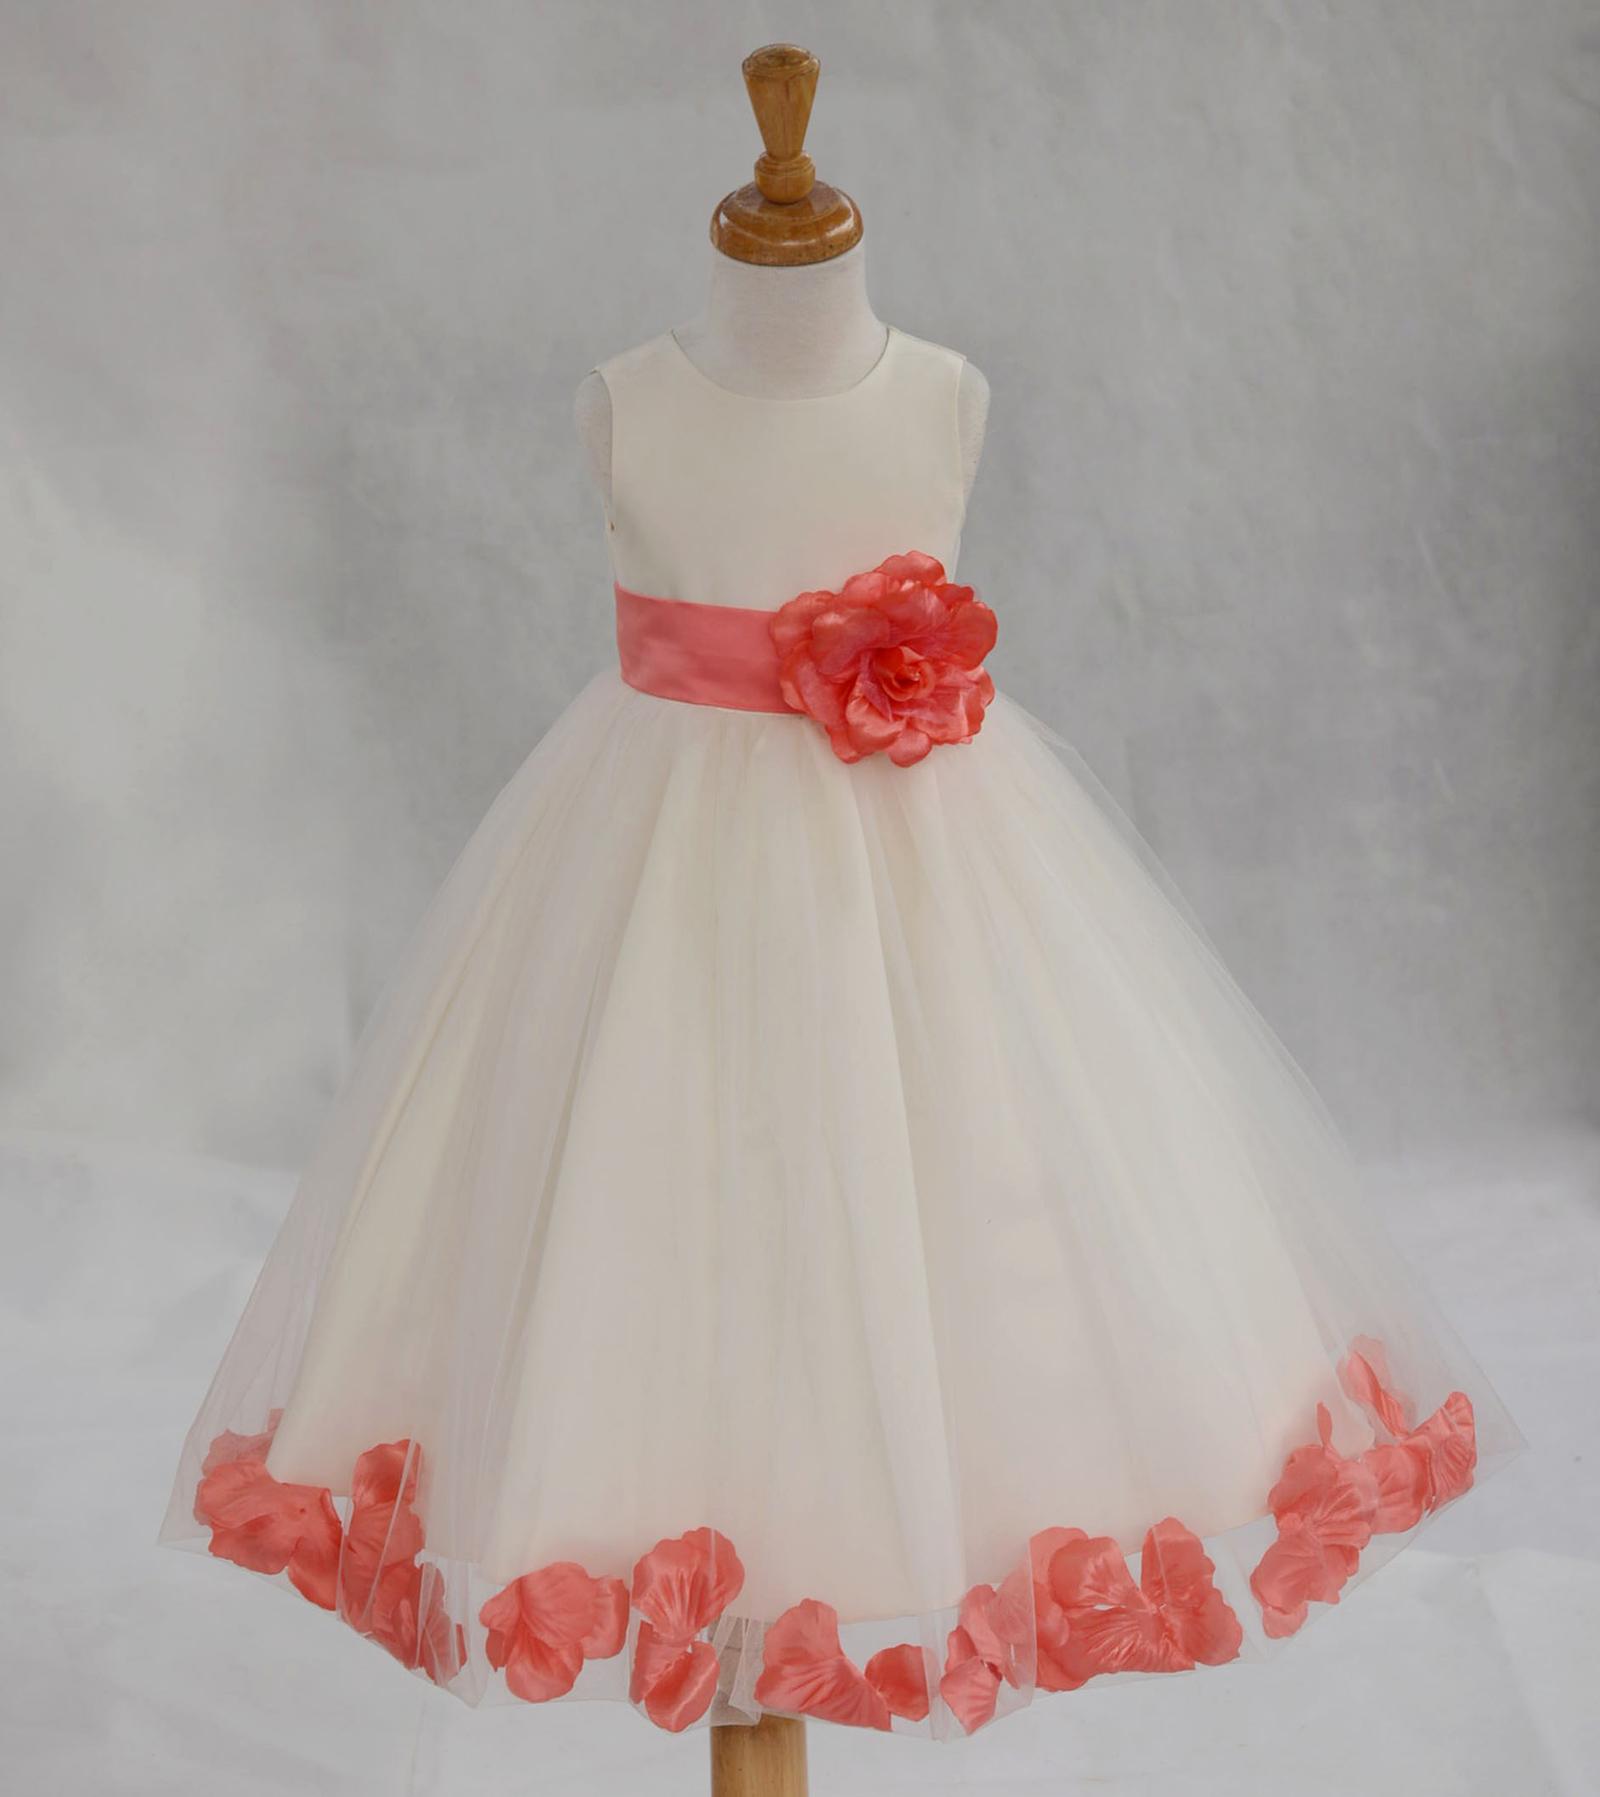 Ekidsbridal Wedding Pageant Ivory Tulle Rose Petals Flower Girl Dress Toddler Special Occasions Bridesmaid Handmade 302t